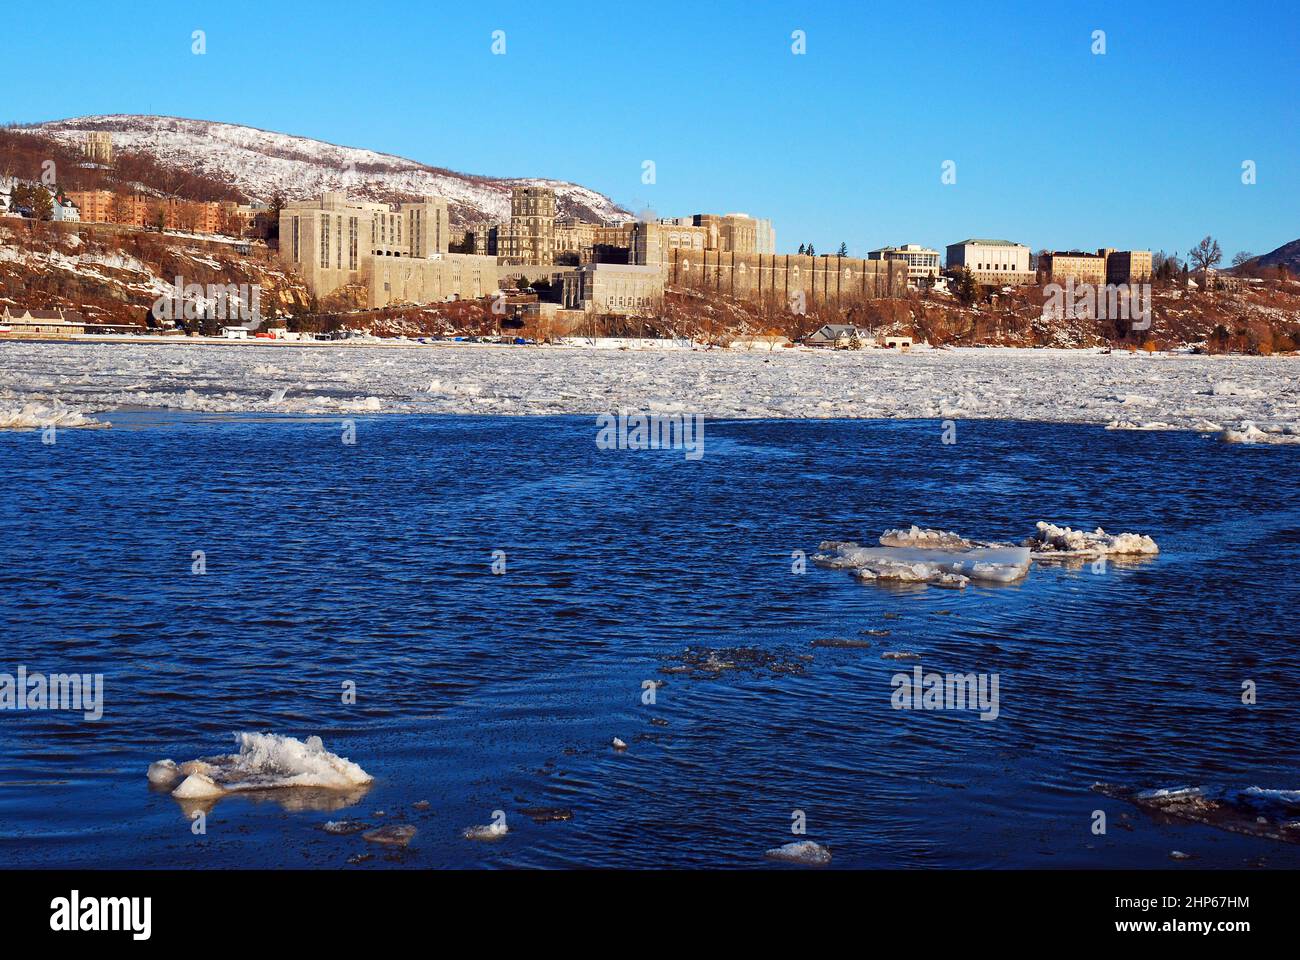 The US Military Academy in West Point stands above a frozen Hudson River Stock Photo